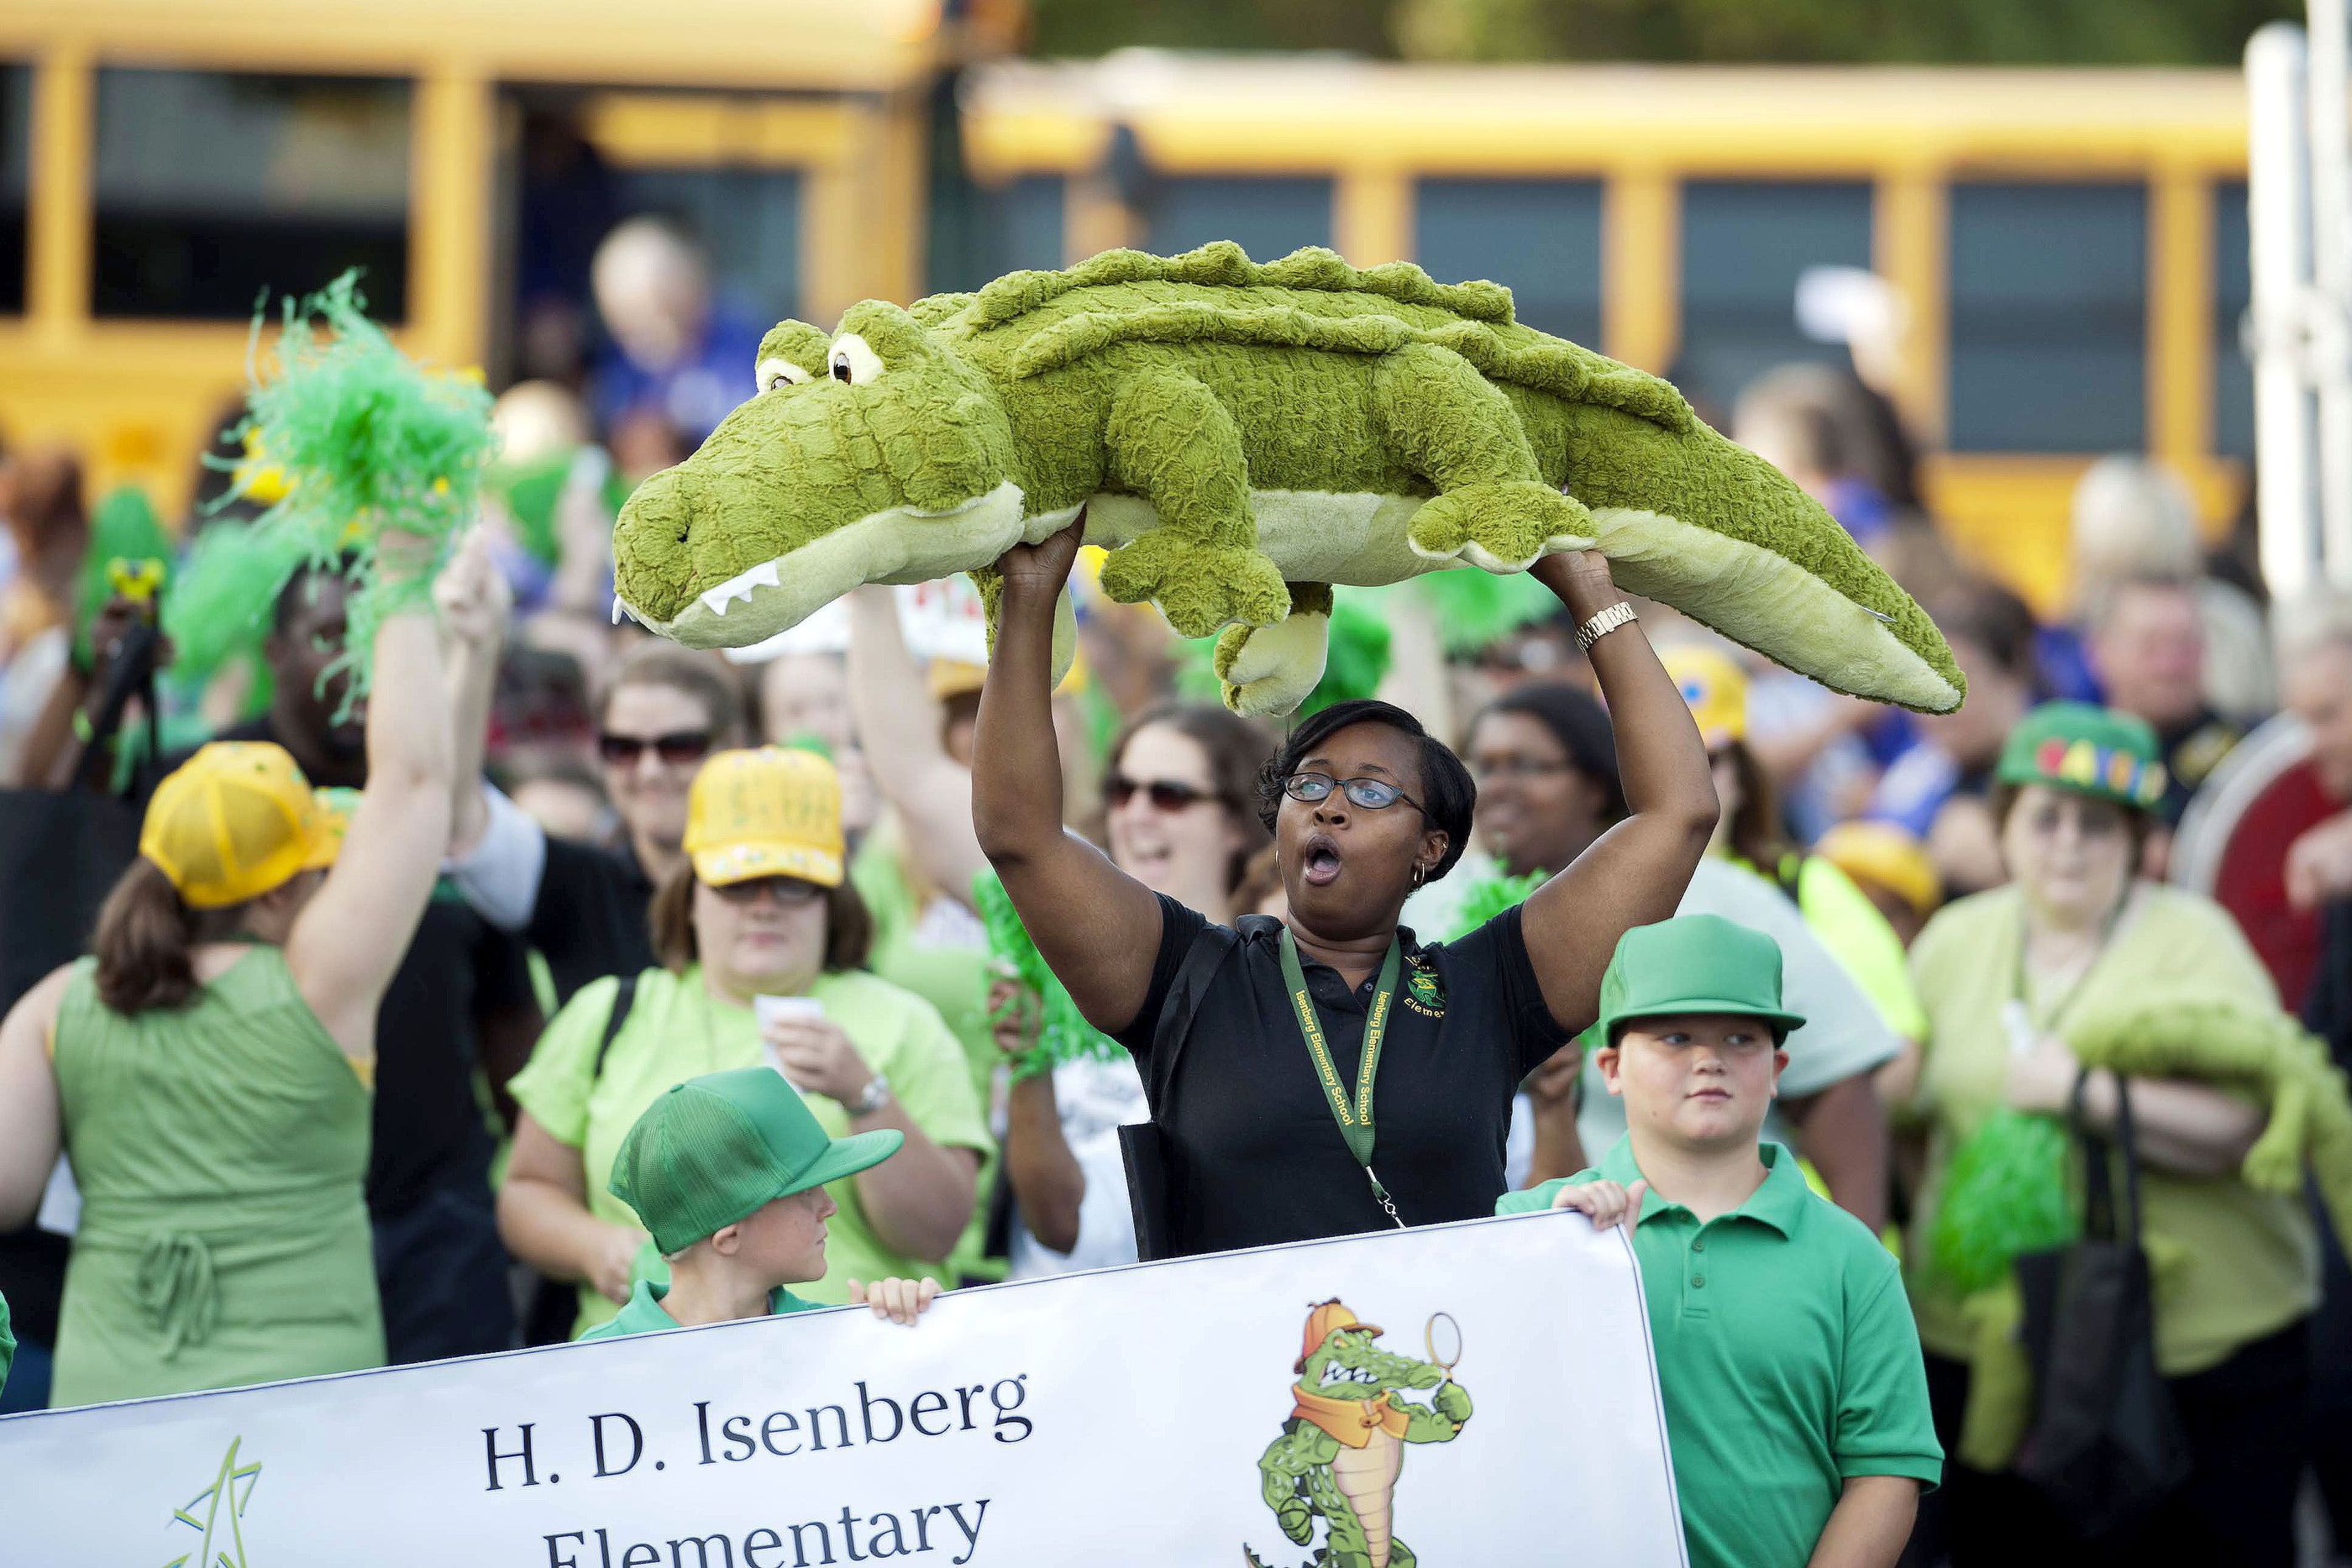 JON C. LAKEY / SALISBURY POST JON C. LAKEY / SALISBURY POST Isenberg Elementary school's 5th grade teacher Asiah Simmons carries a large toy alligator into the stadium The Rowan Salisbury School employees , over 3,000 strong, gathered in the football stadium at North Rowan High School on Thursday morning for the first ever system wide pep rally. Thursday, August 21, 2014, in Spencer, N.C.